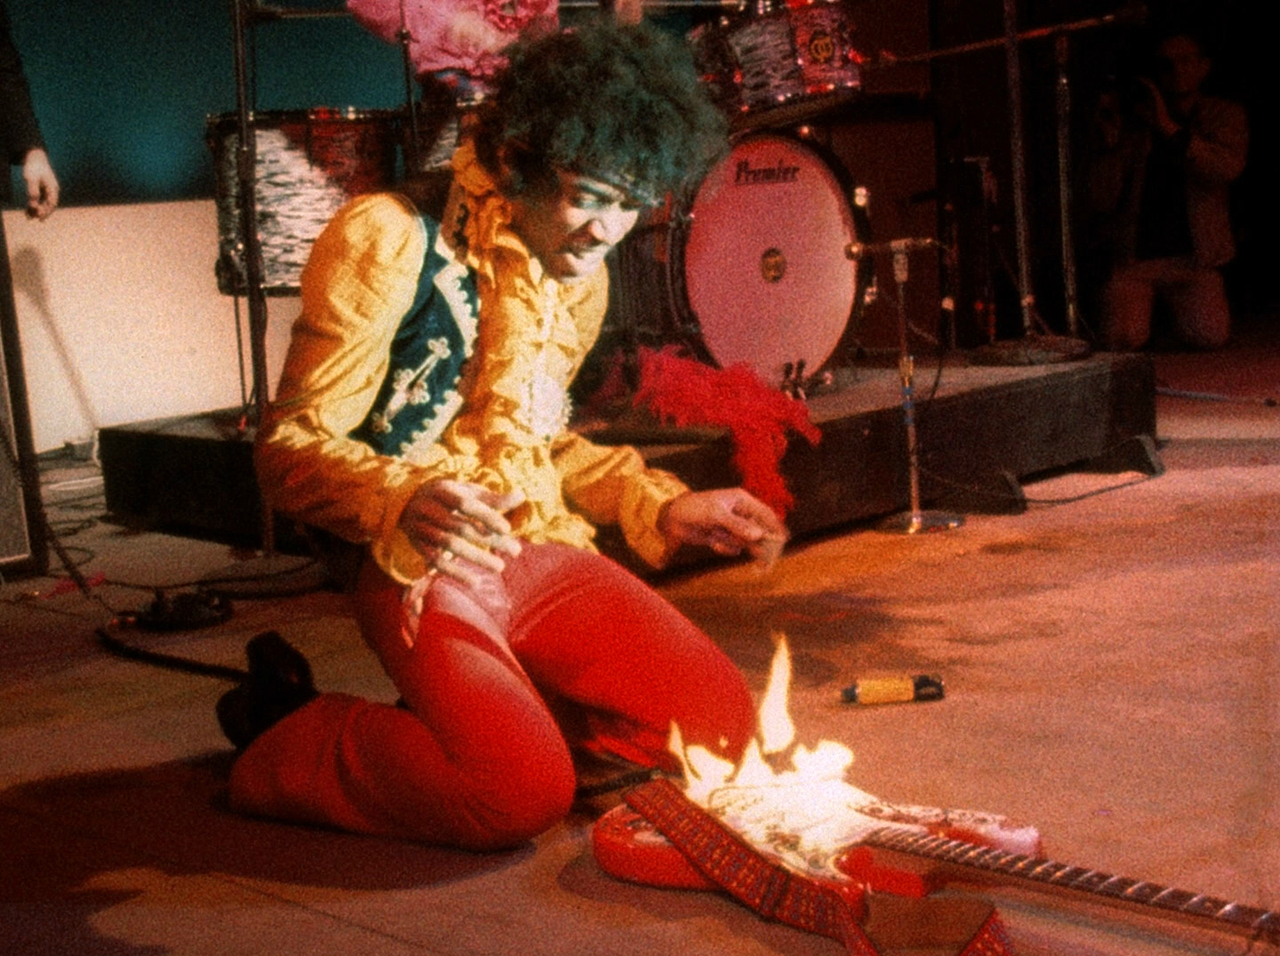 Jimi Hendrix setting fire to his Monterey Fender Stratocaster on stage at Monterey Pop Festival in 1967